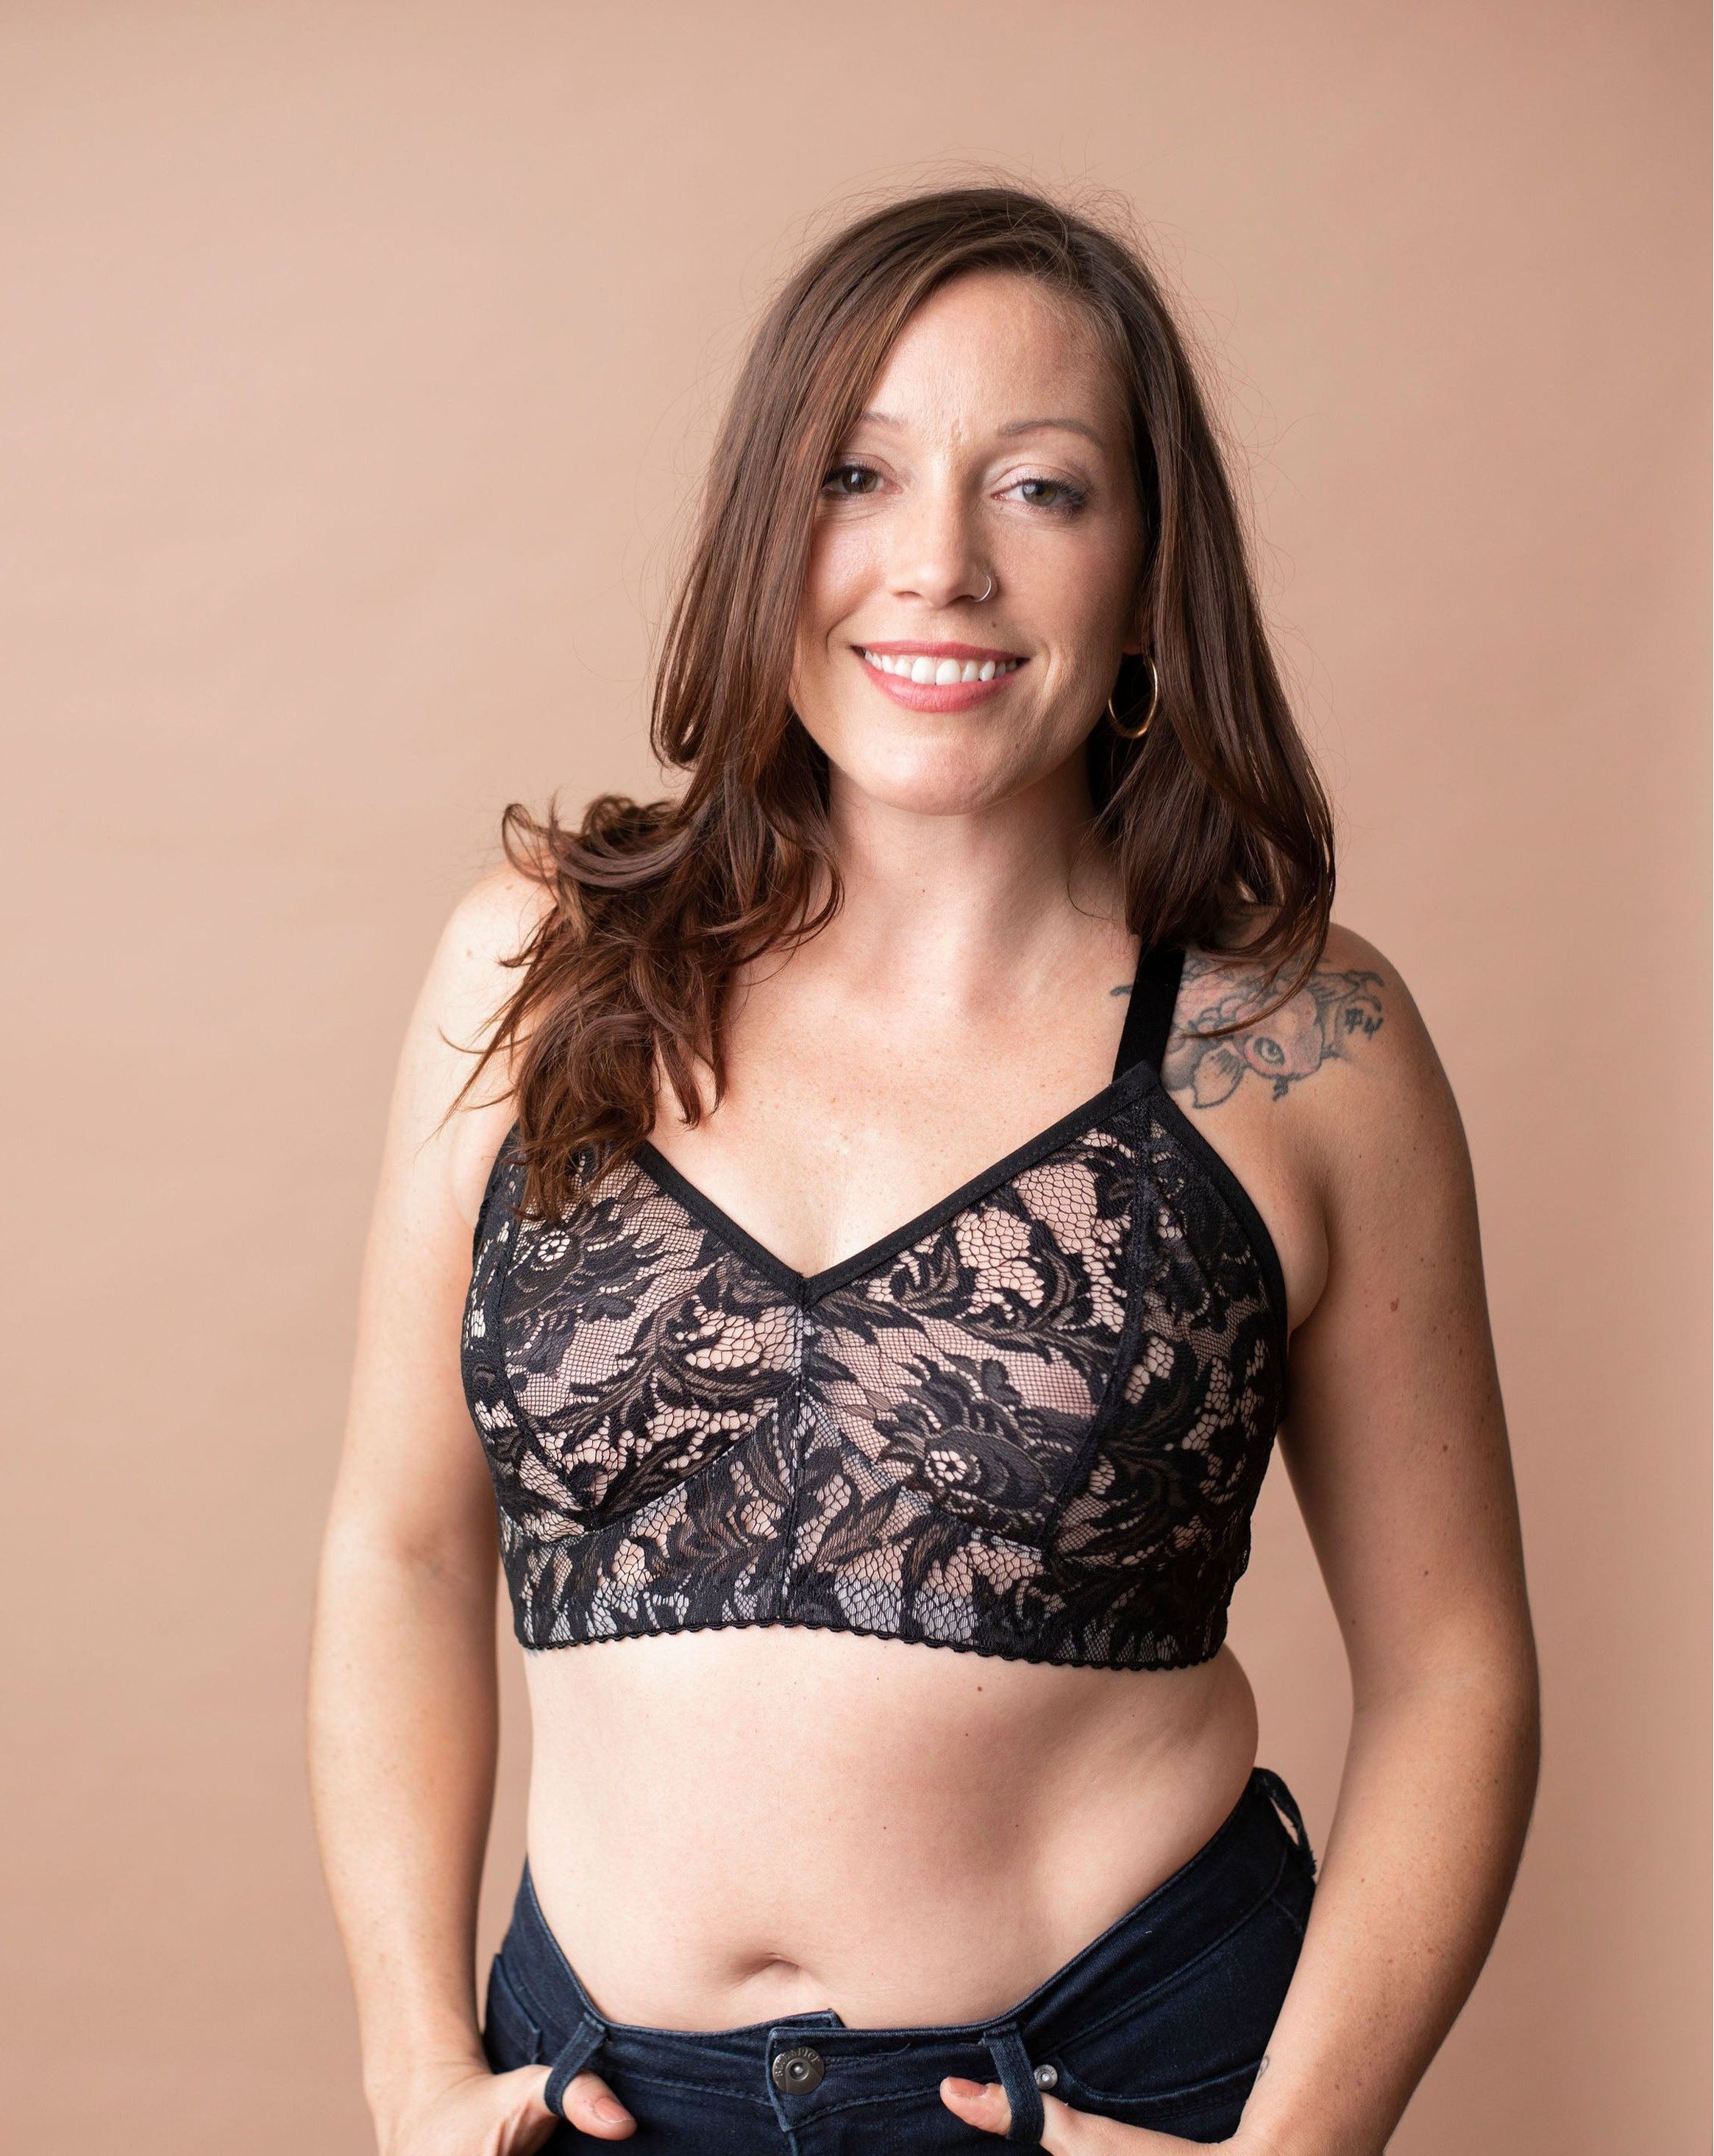 Model in Rubies Chantilly lace bra on a brown background.